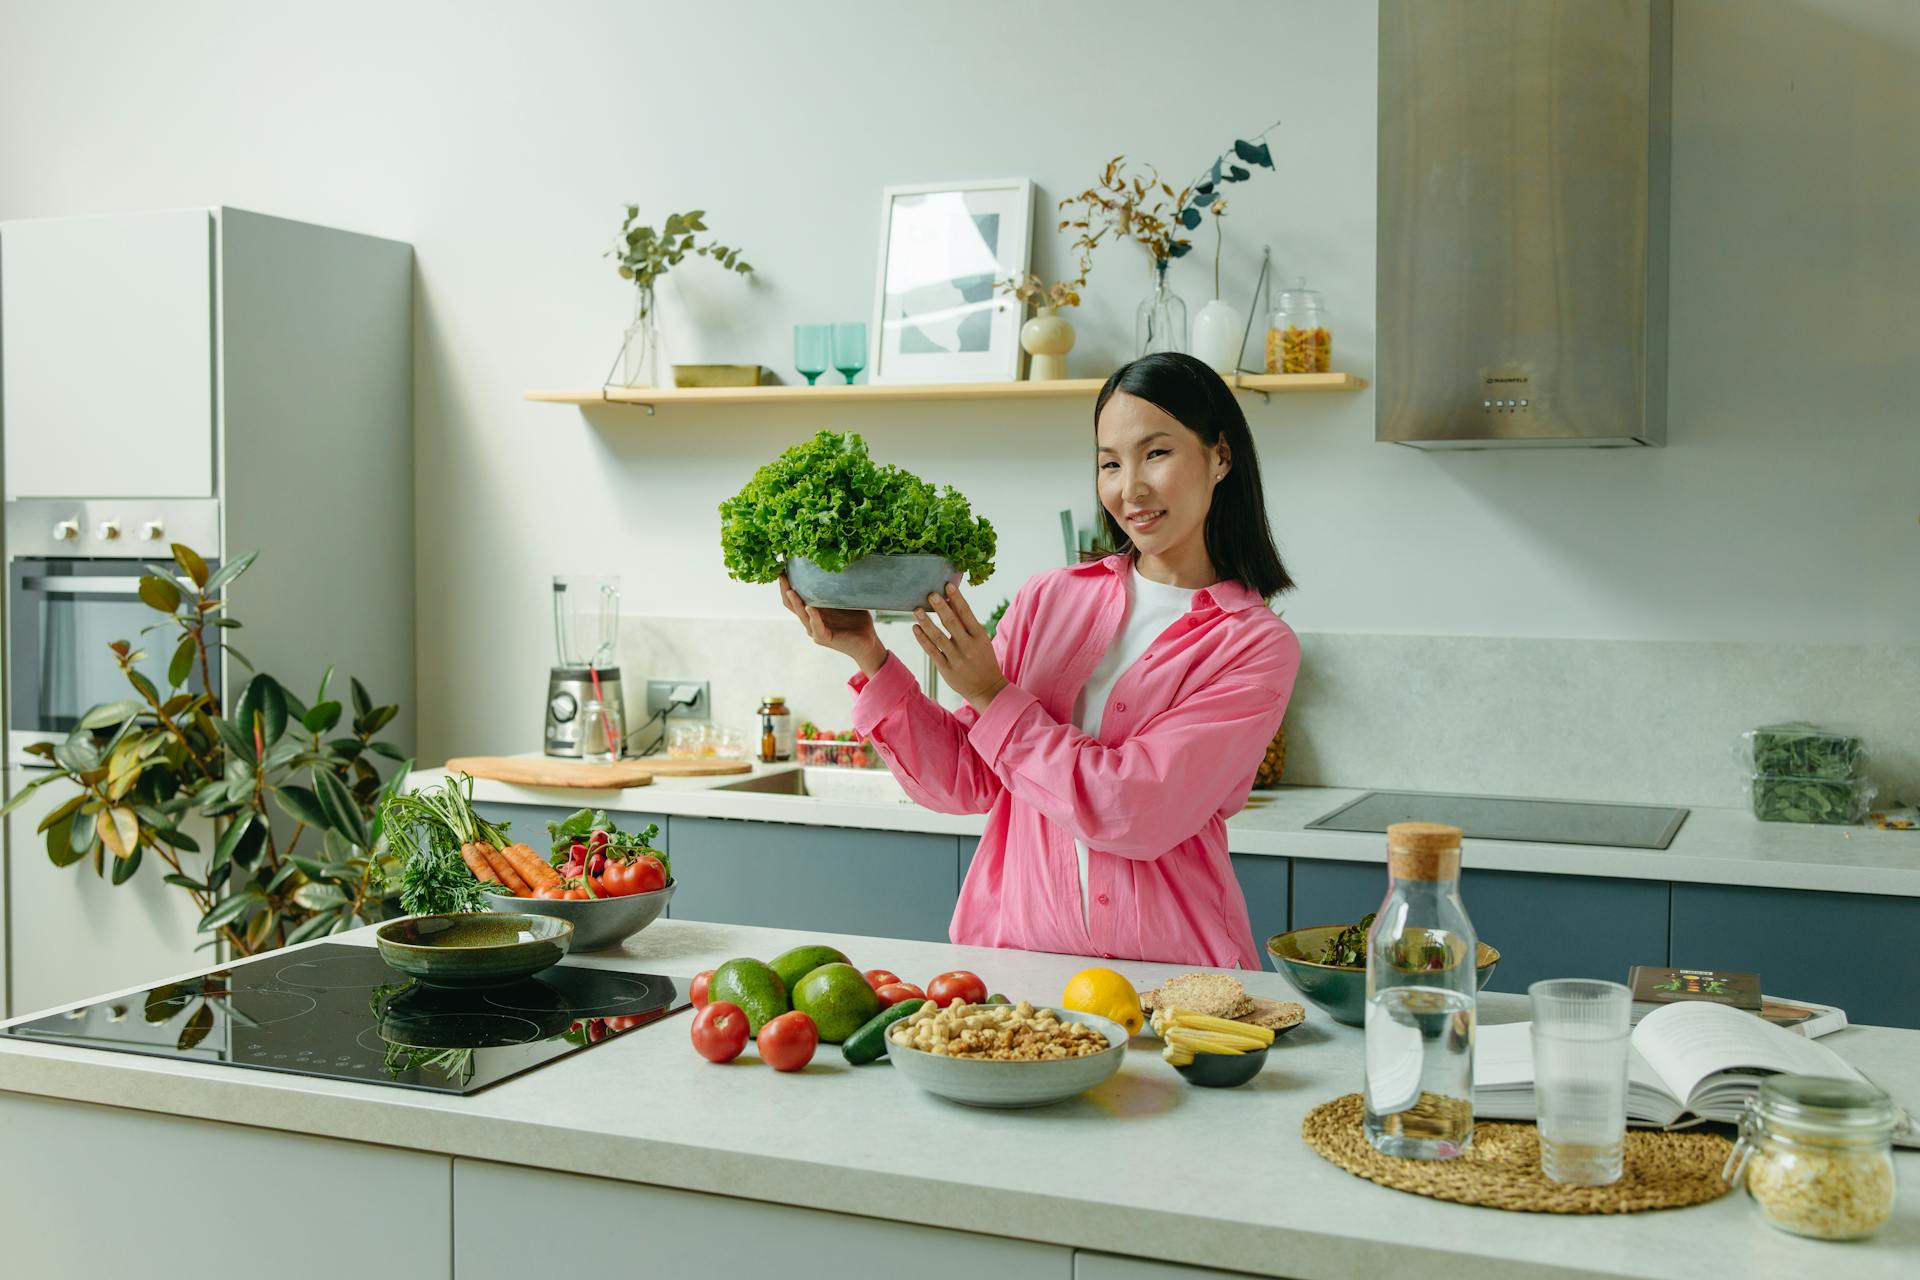 A Woman in Pink Long Sleeves Standing in the Kitchen while Holding a Bowl of Lettuce